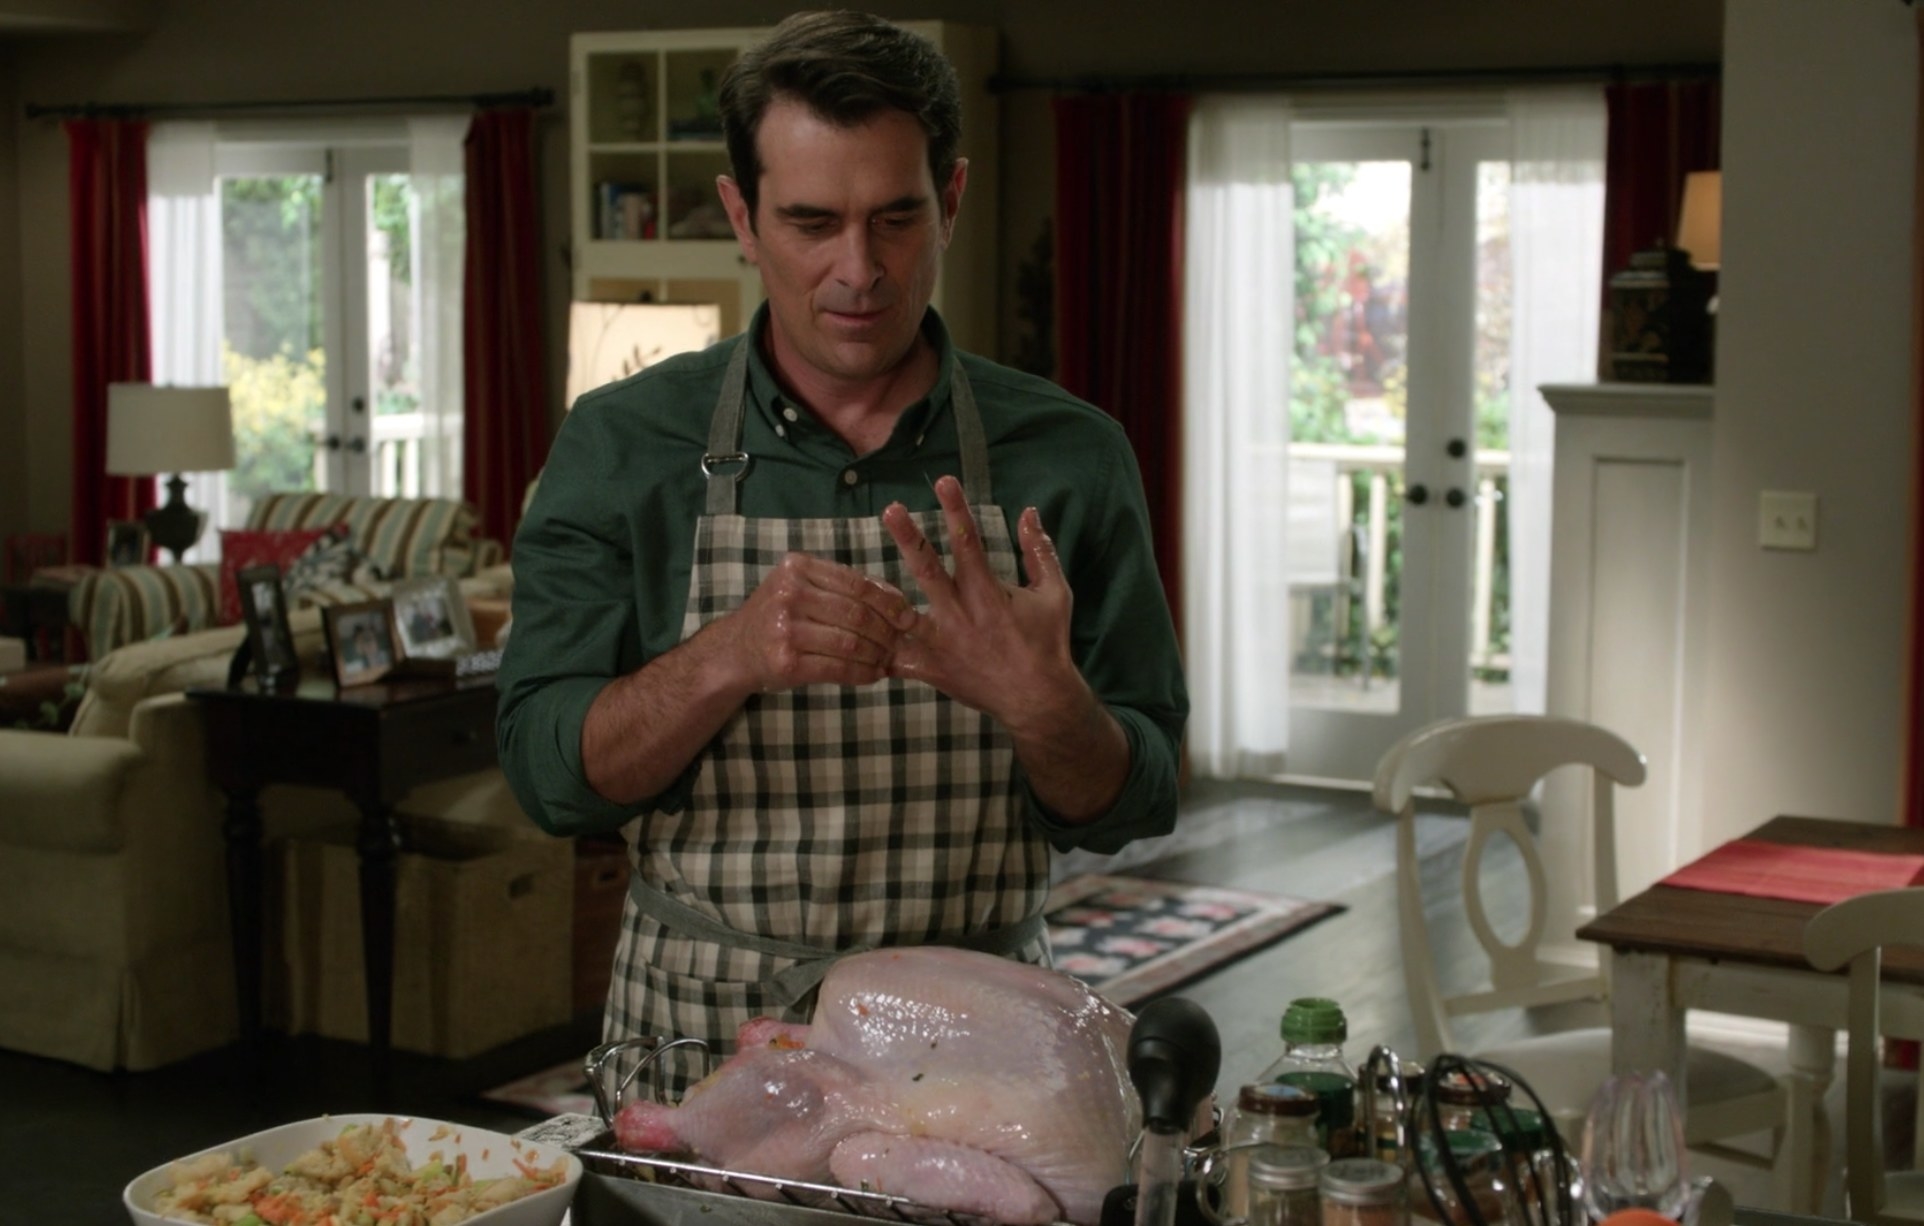 Phil taking off his wedding ring while cooking the turkey